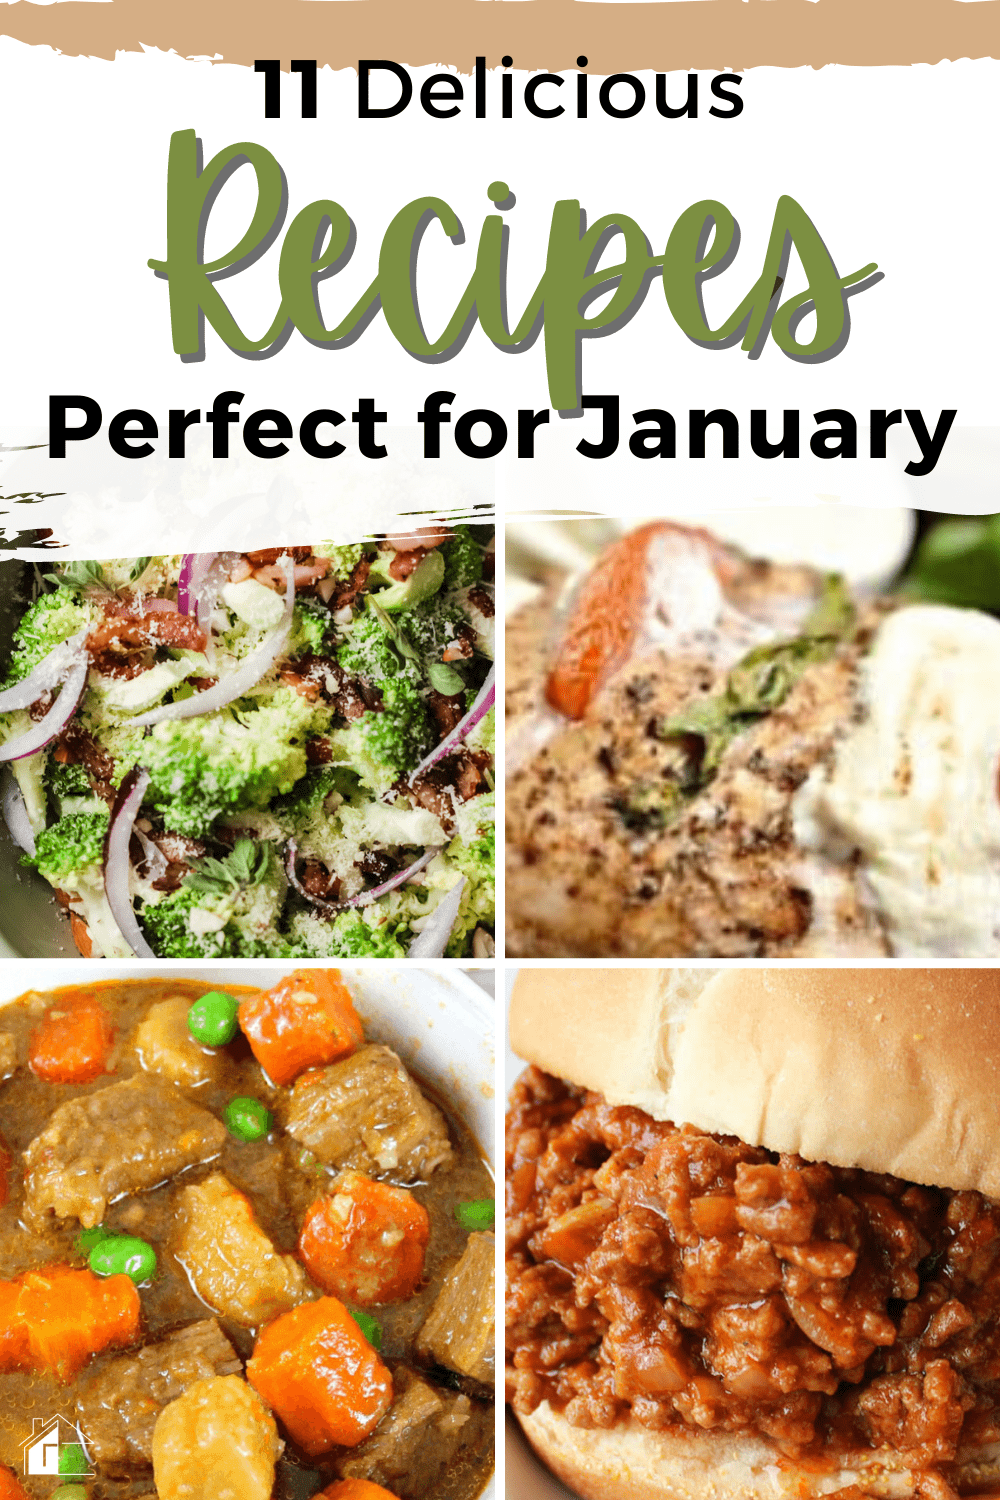 For the month of January, these recipes will help you enjoy lovely winter meals. From soups to pasta to desserts, they're all delicious and easy! via @mystayathome